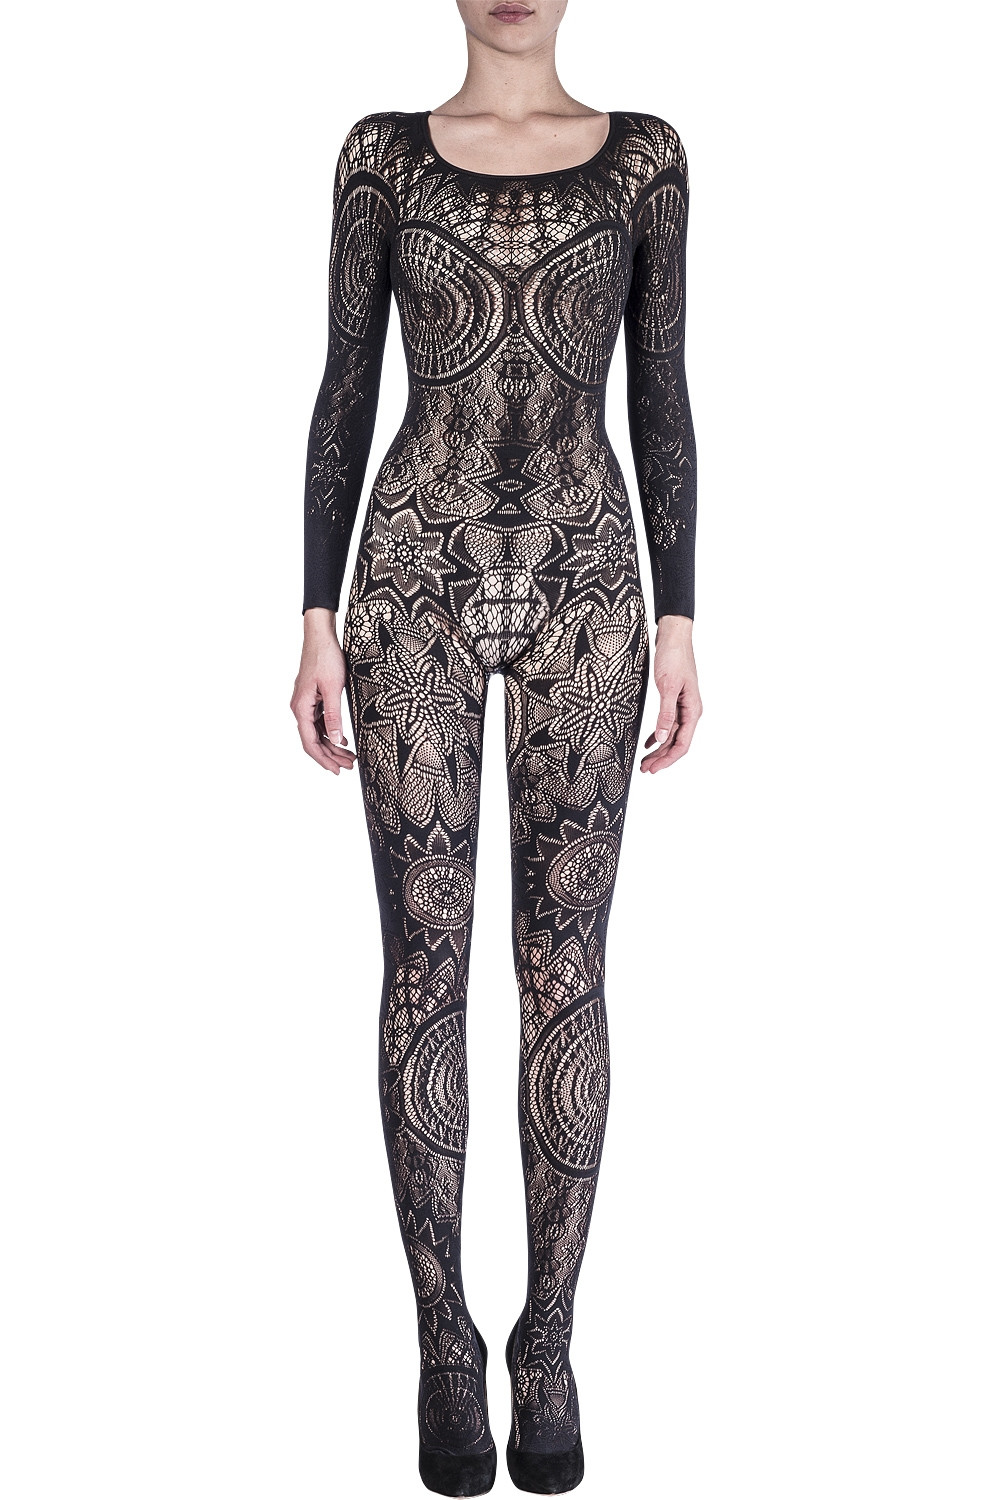 Jumpsuits for Women, Intriguing, seductive bodysuits and bodystockings